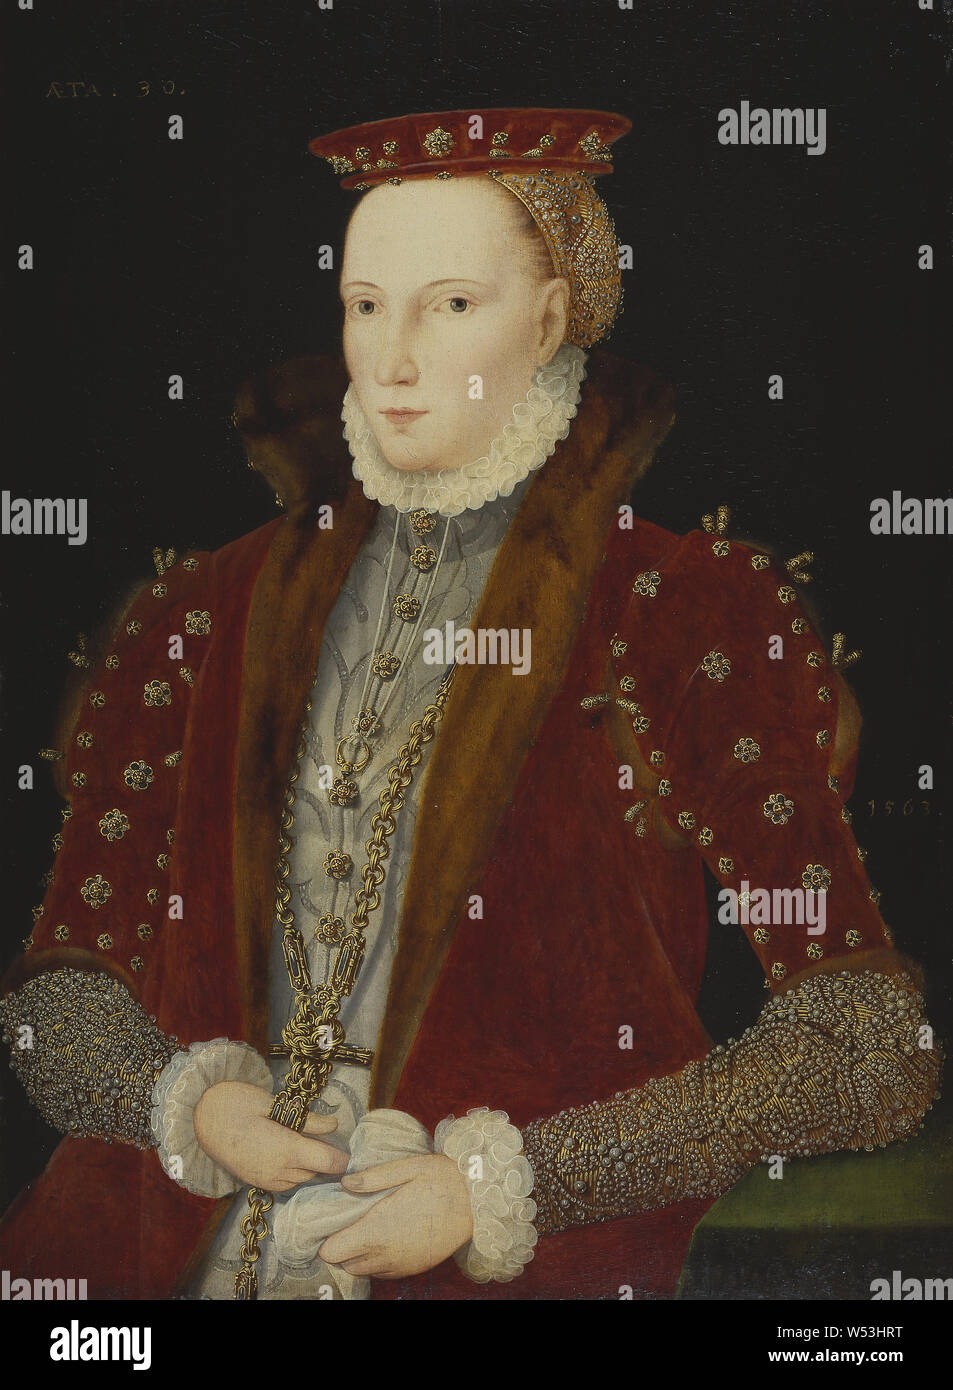 Unidentified painter, Elizabeth, 1533-1603, Queen of England, Unknown woman, painting, portrait, 1563, oil on panel, Height, 79 cm (31.1 inches), Width, 58 cm (22.8 inches) Stock Photo